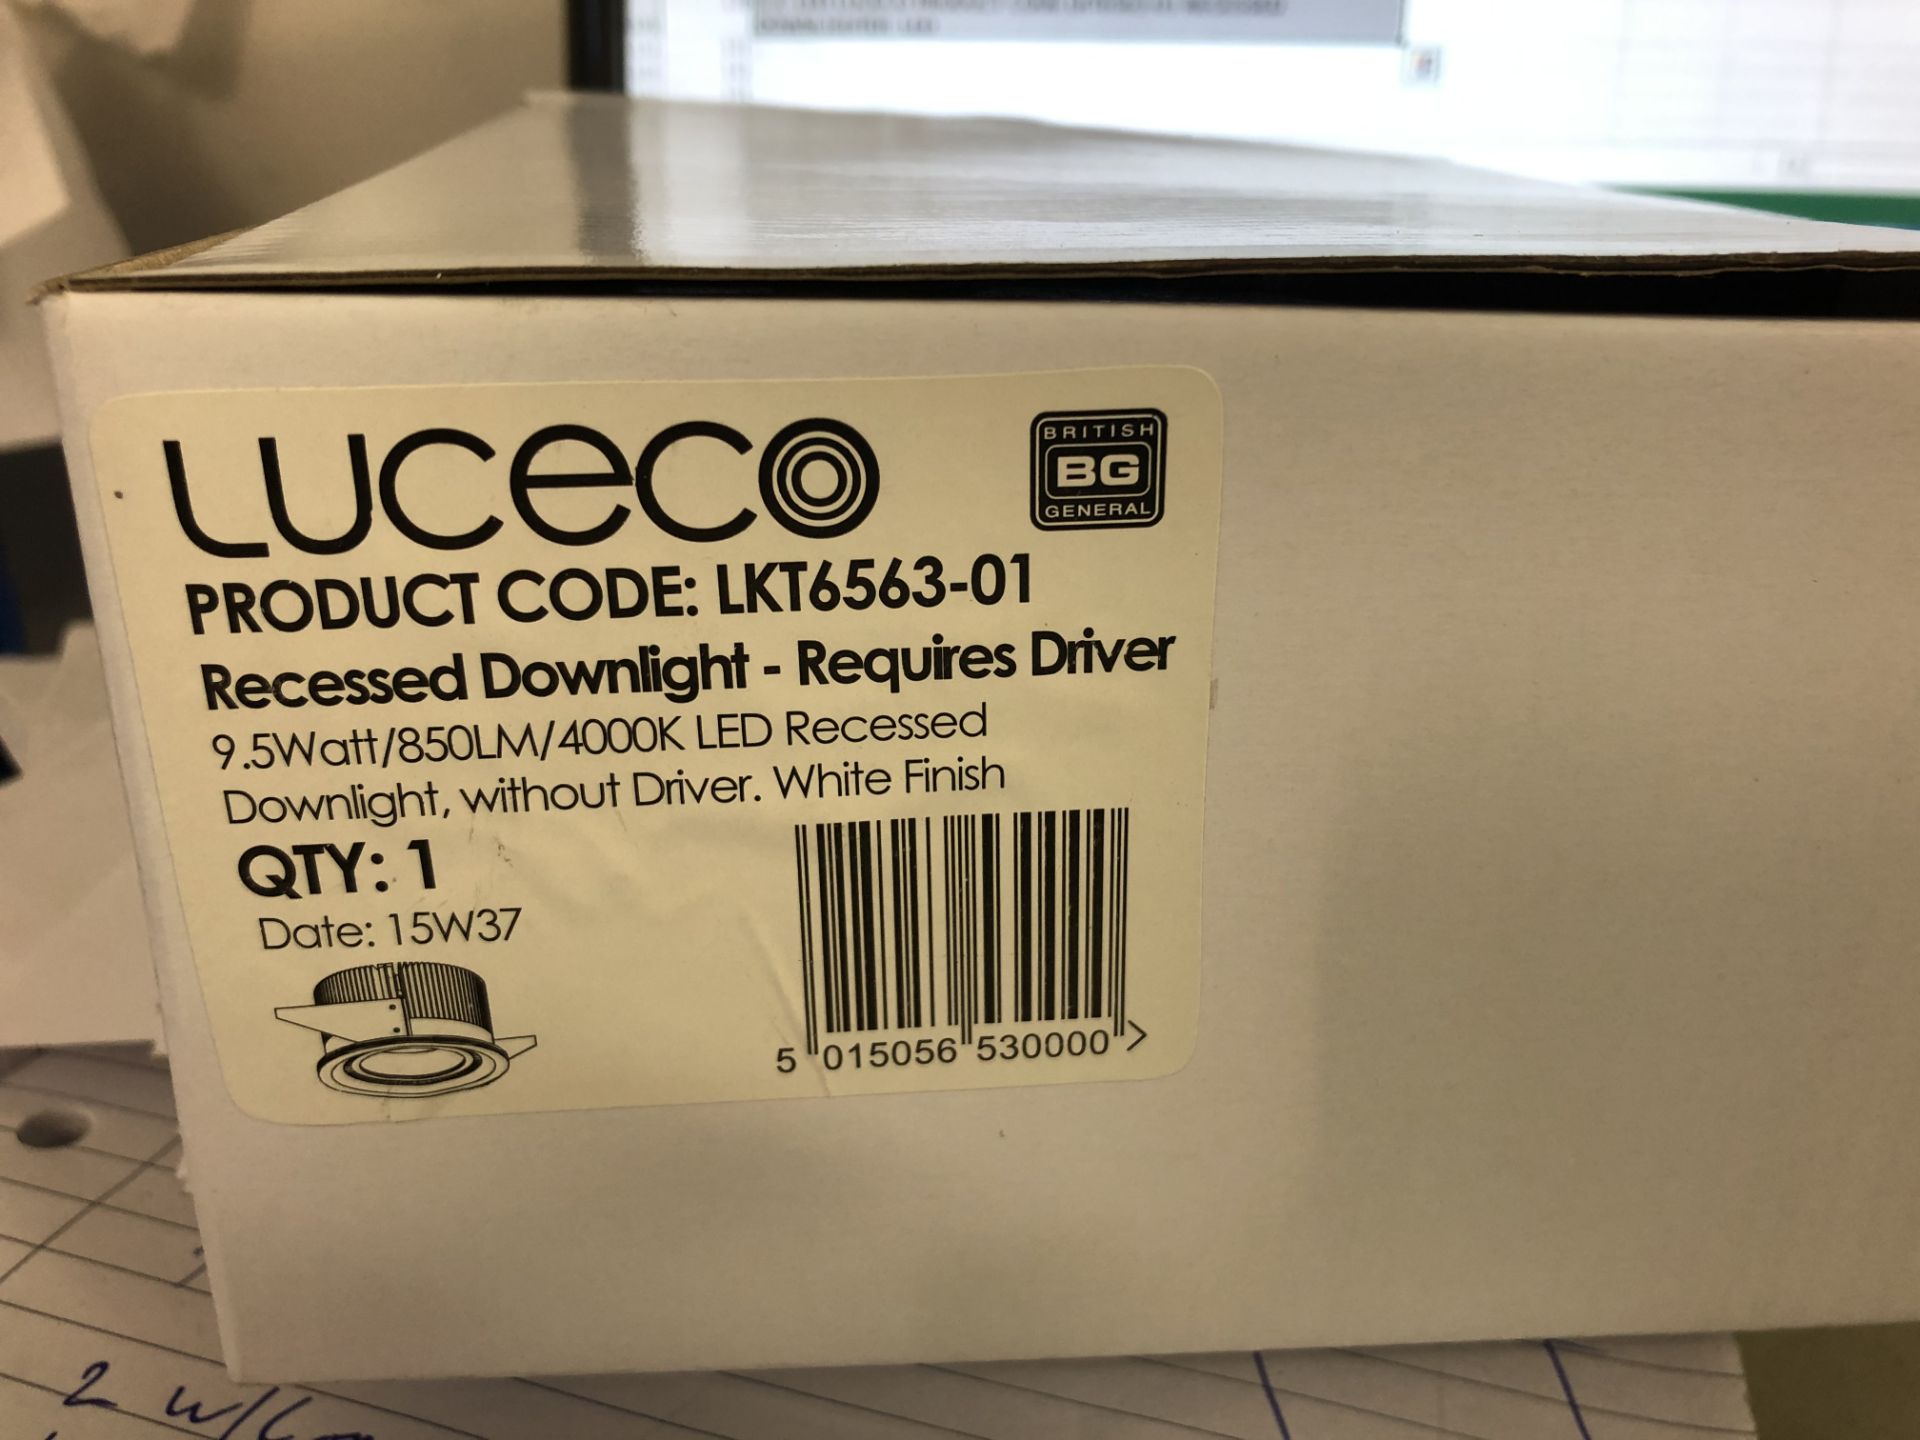 5 X LED LUCECO PRODUCT CODE LKT6563-01 RECESSED DOWNLIGHTER LED